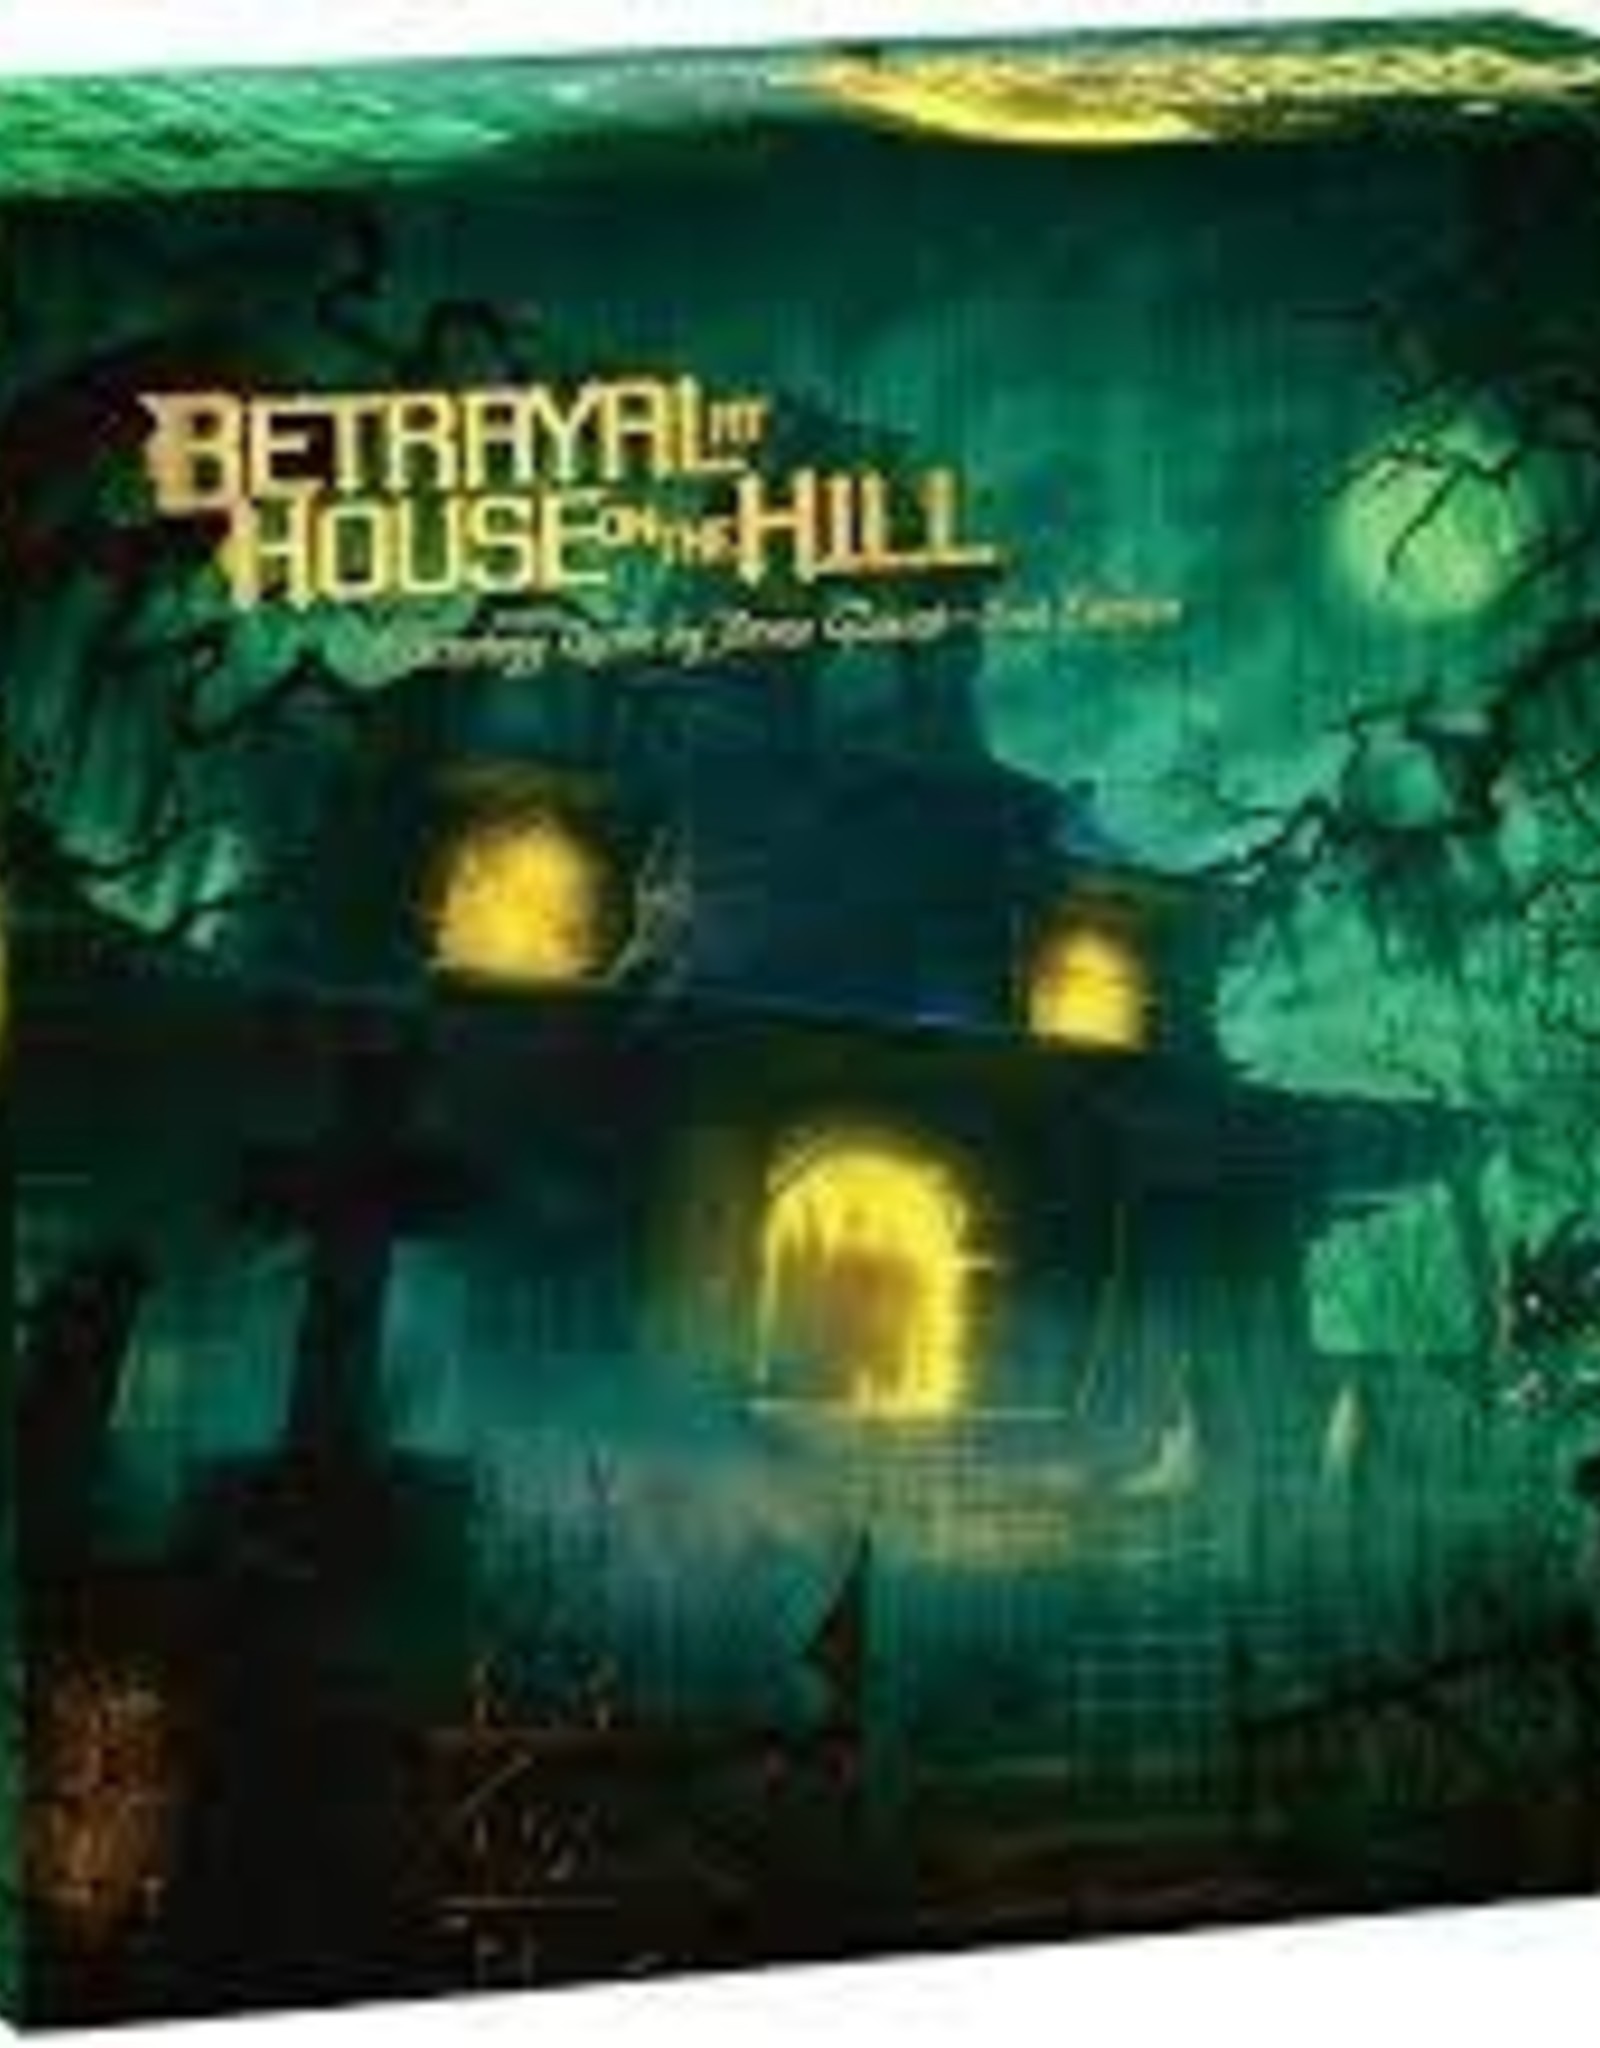 Avalon Hill Betrayal at House on the Hill